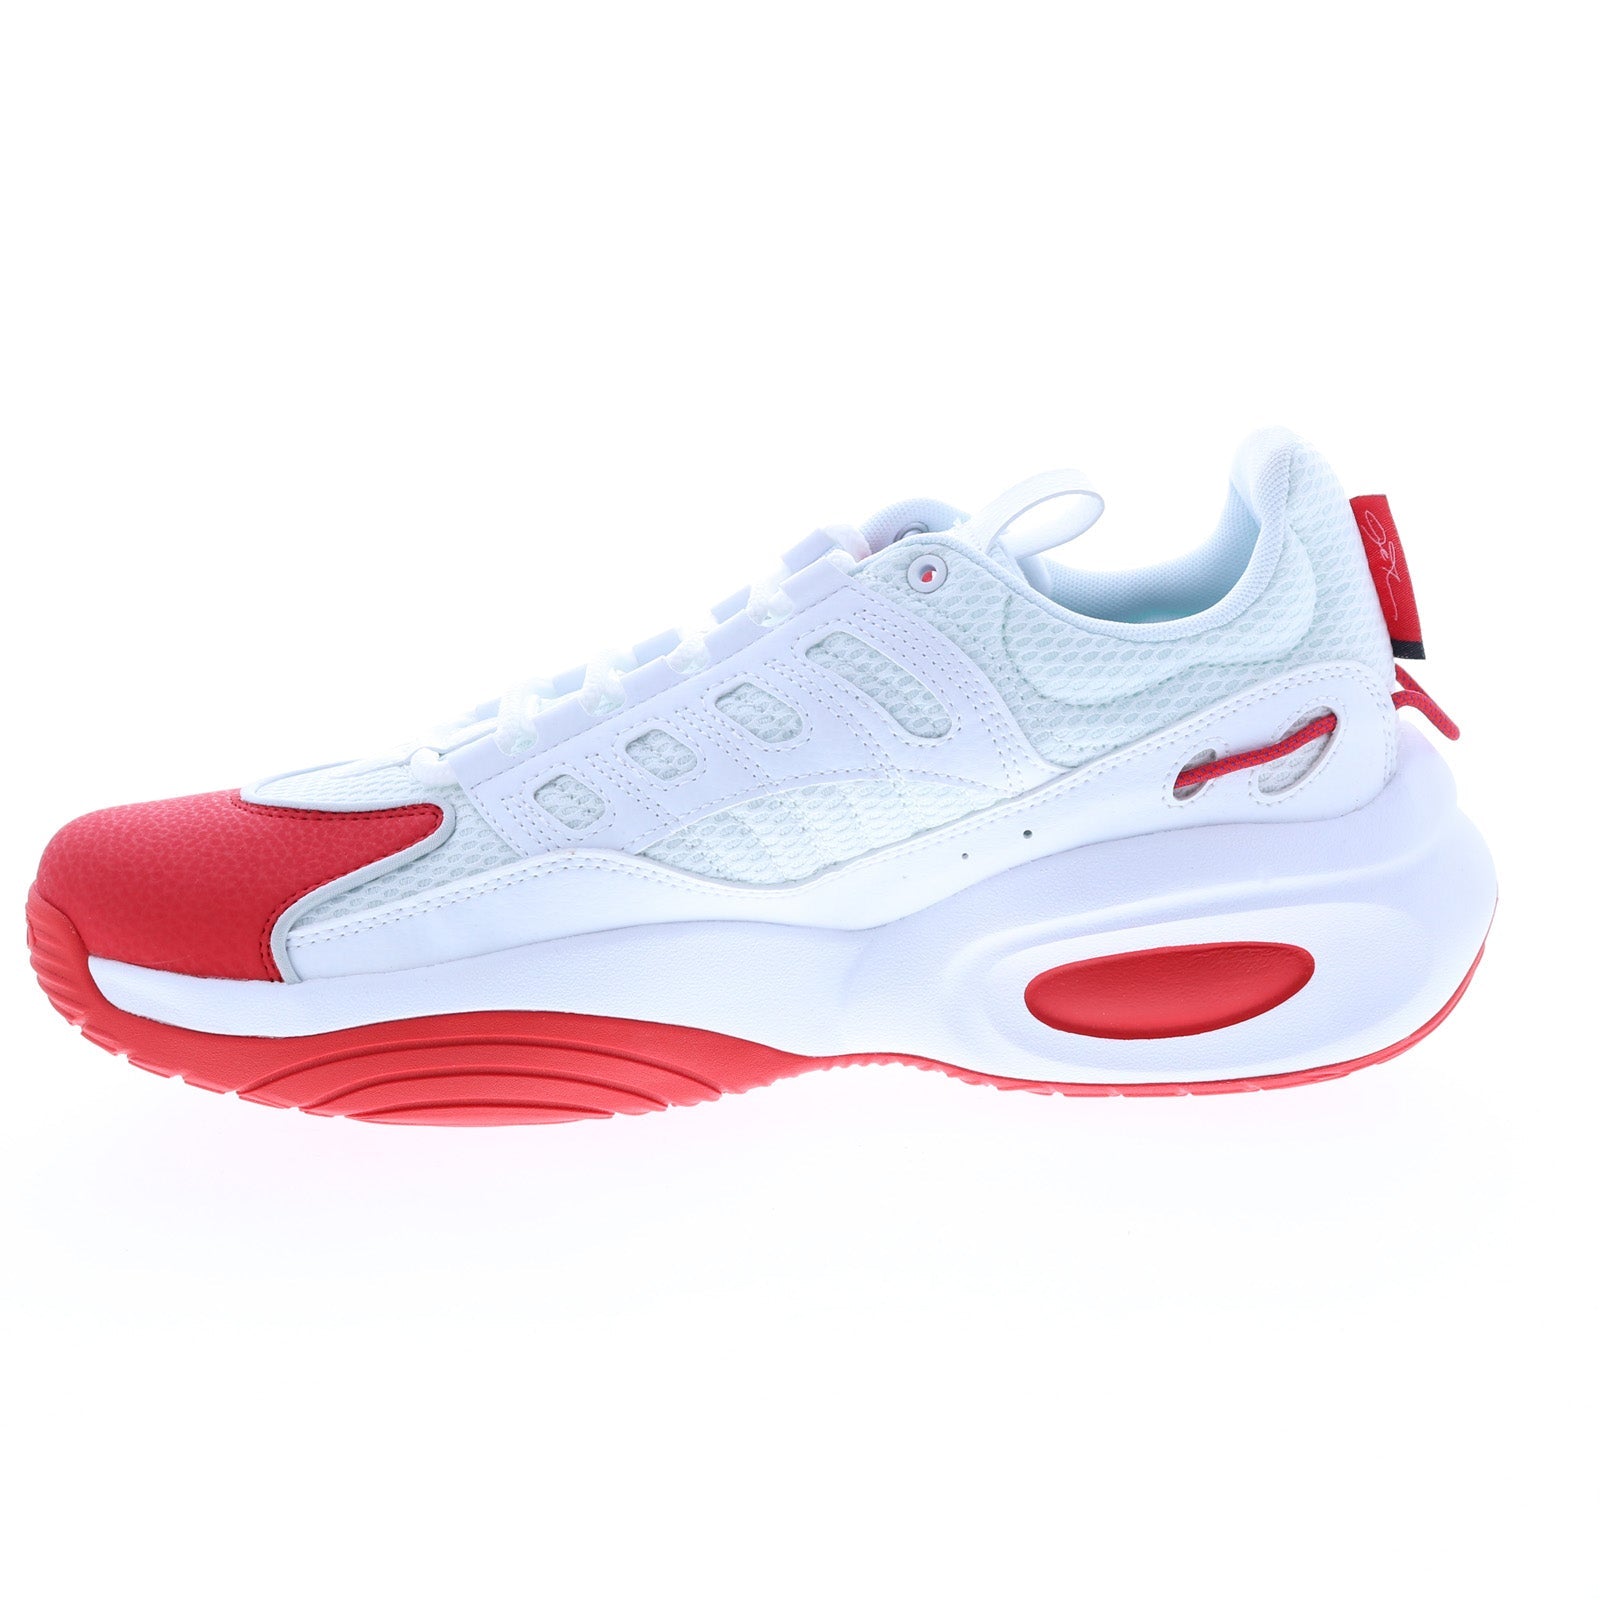 Reebok Solution Mid White Red GY0930 Release Date